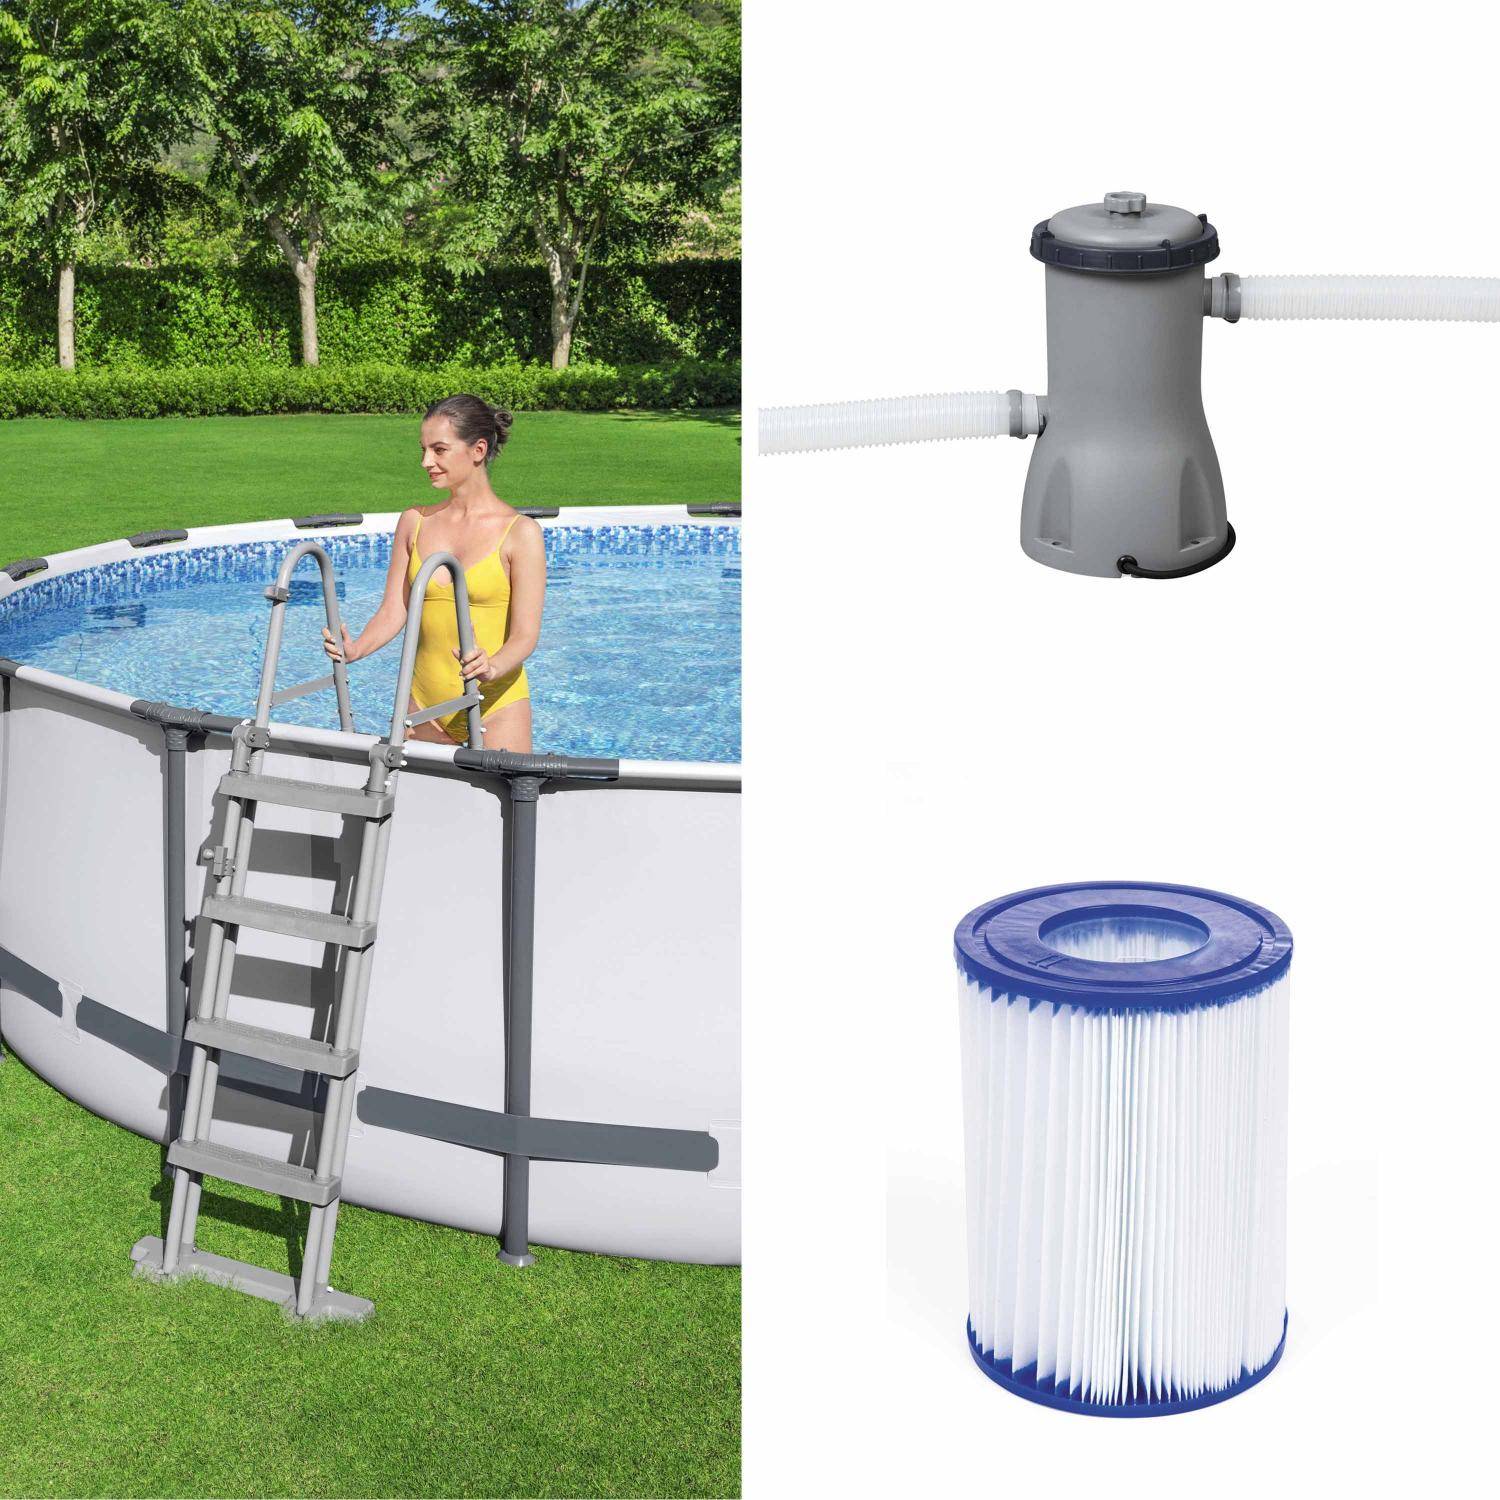 15ft round tubular above-ground swimming pool with filter pump, steel frame, repair kit, 457 x 122 cm - Bestway Come - Grey Photo4